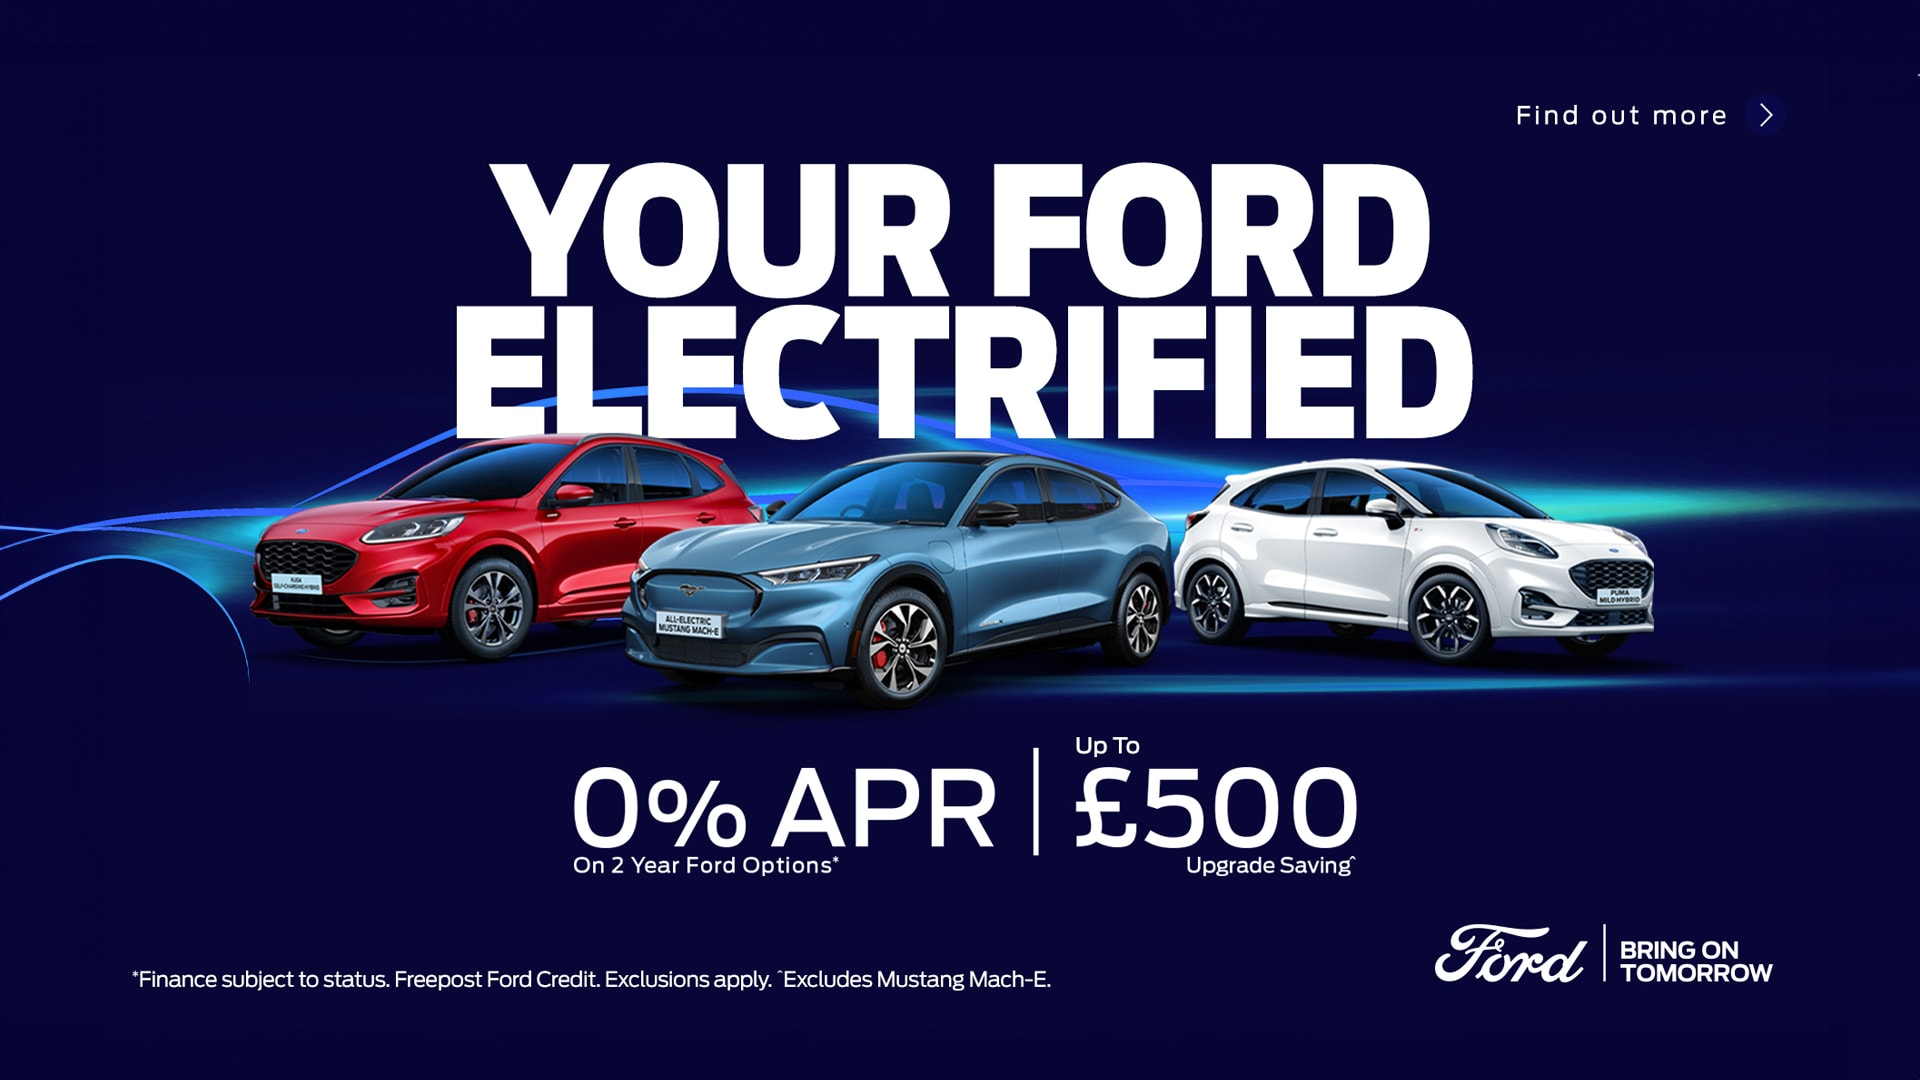 Your Ford Electrified, Electric Vehicle Promotion